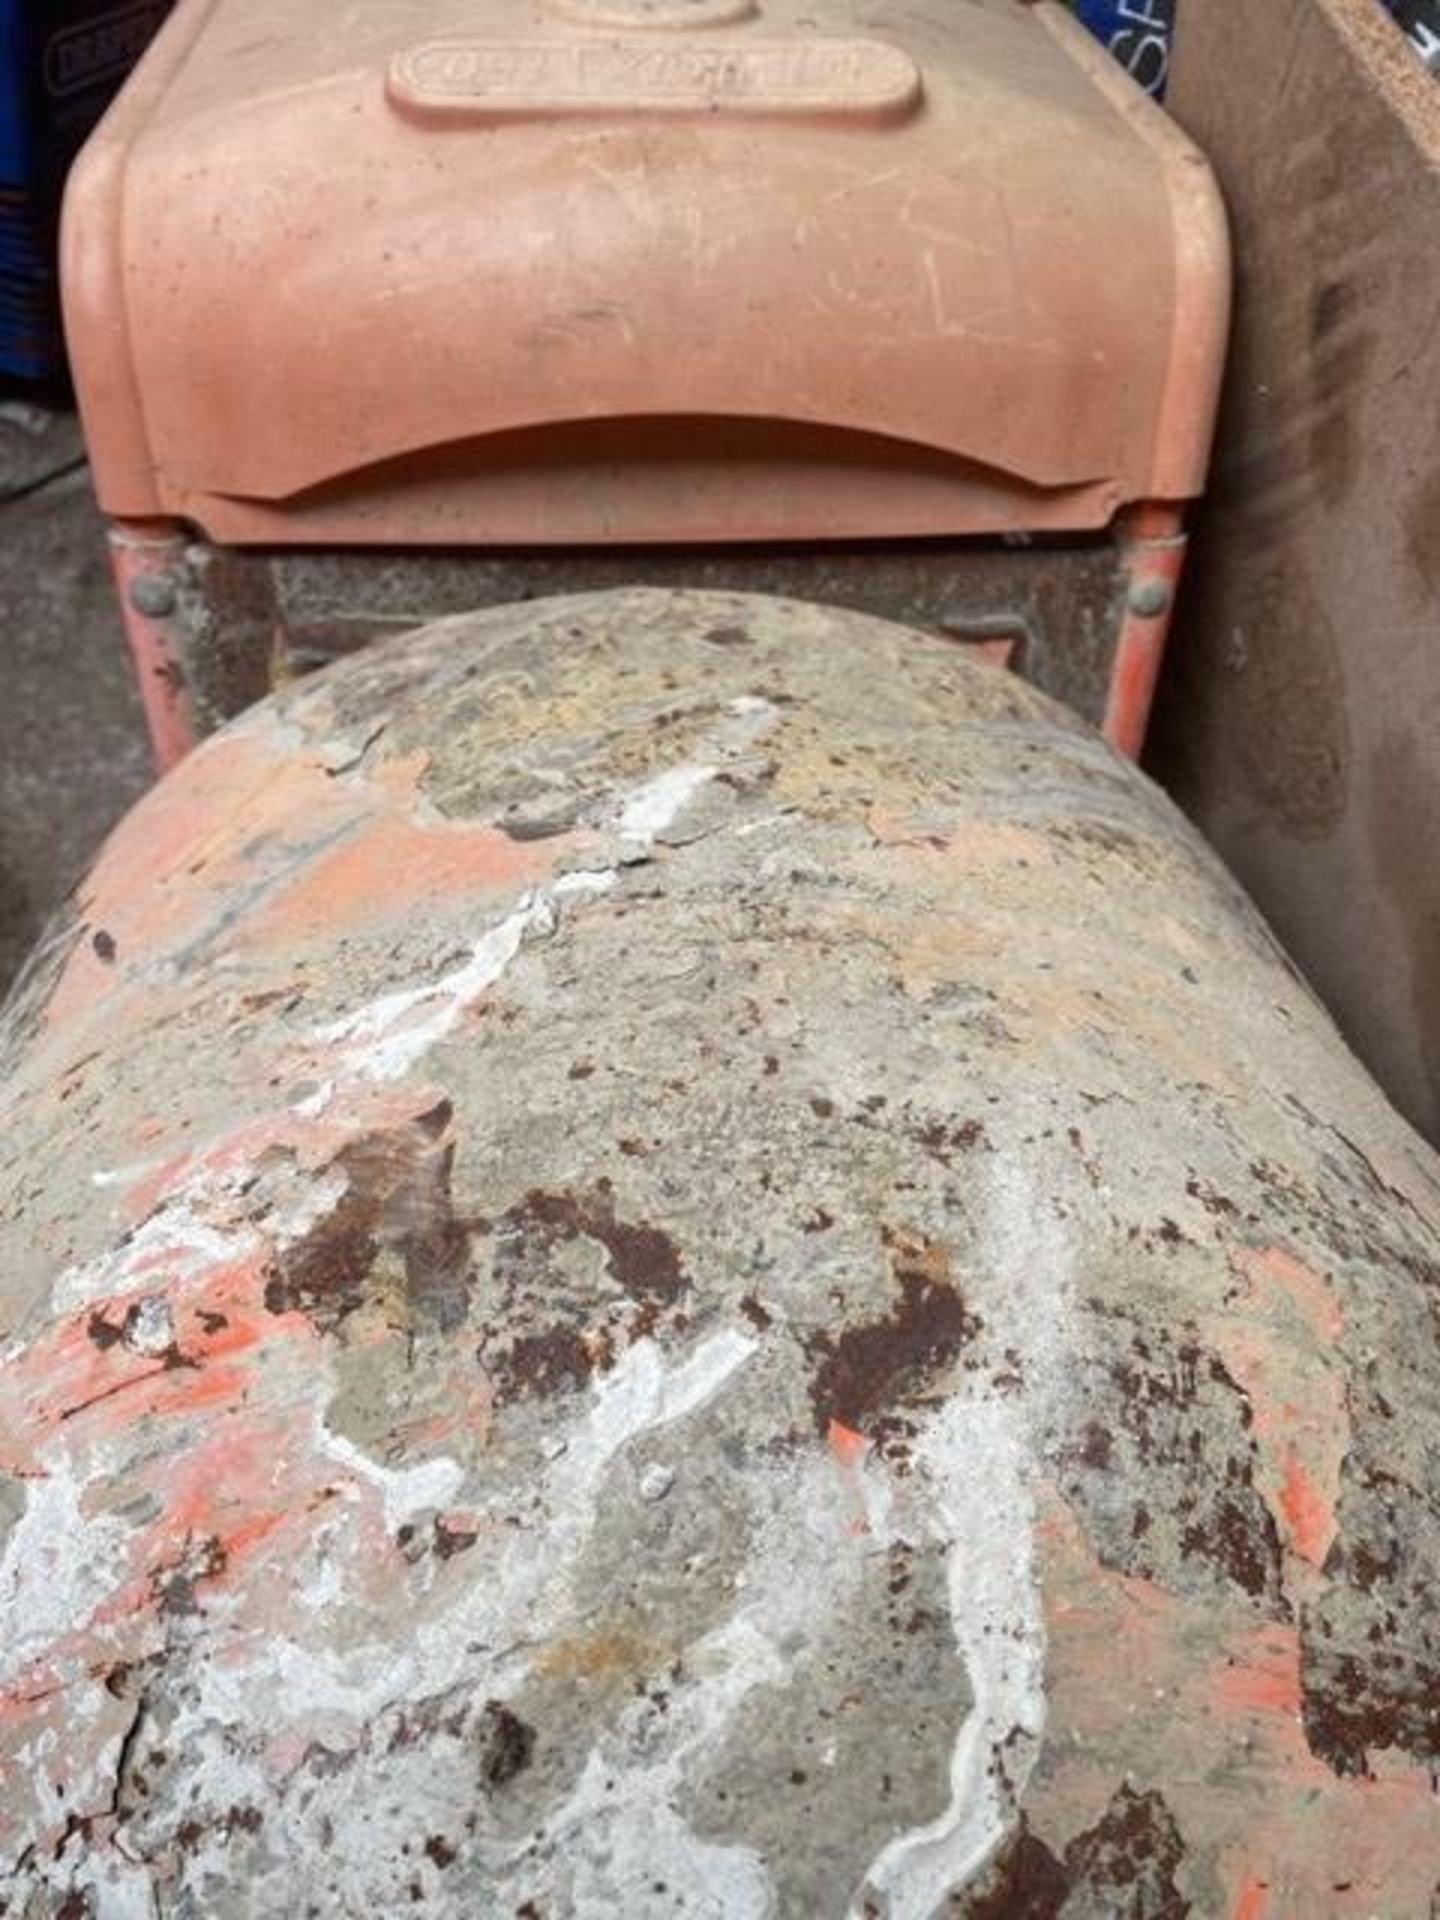 BELLE PETROL CEMENT MIXER - Image 2 of 3